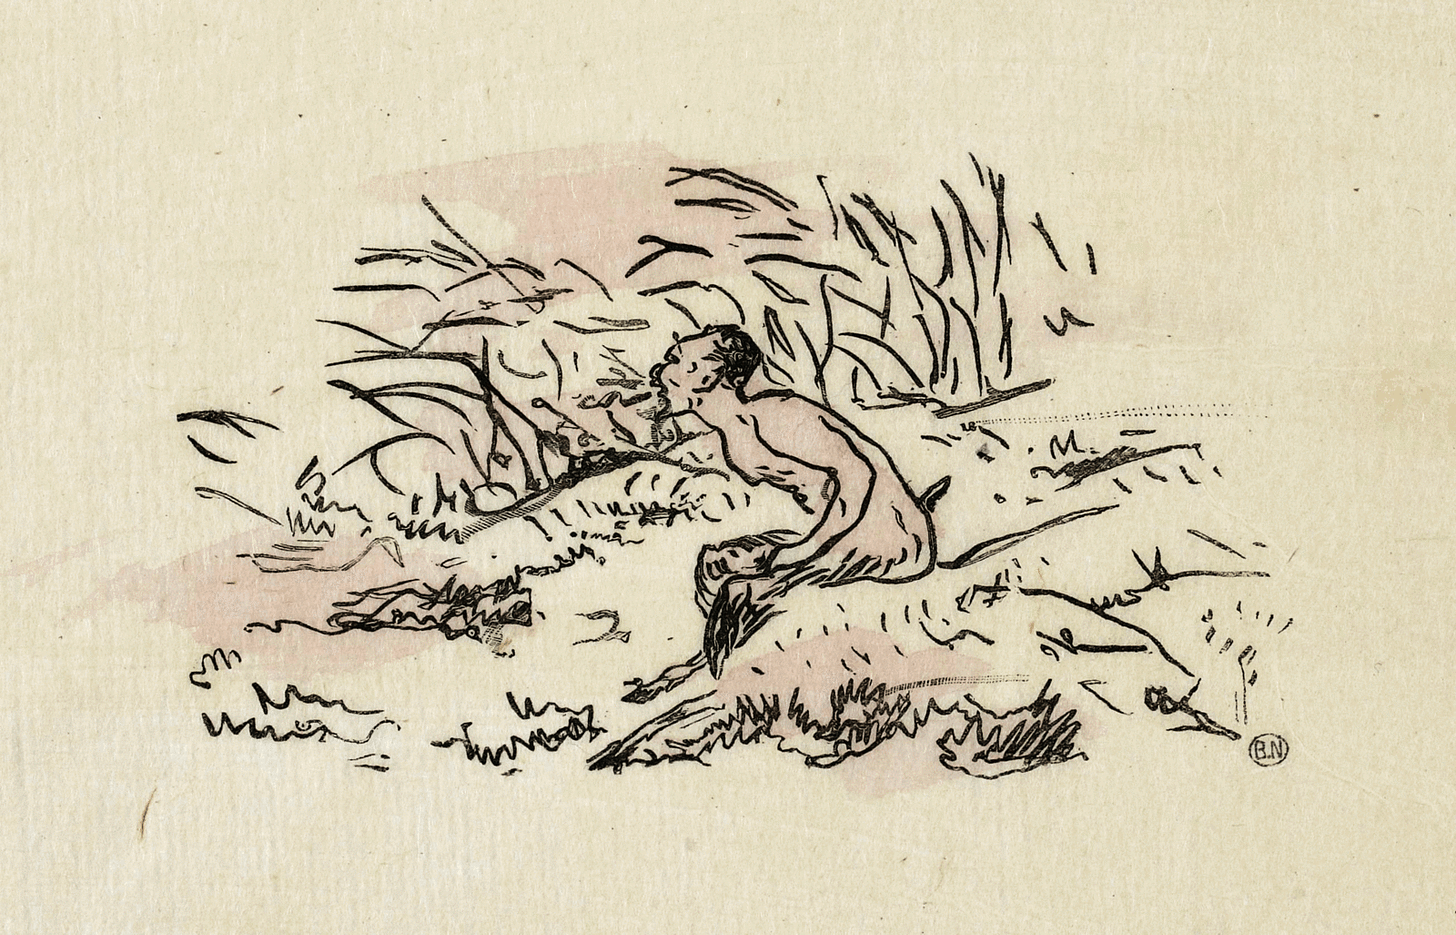 Line drawing by Eduouard Manet depicting a faun (half-man, half-goat) in a lush meadow